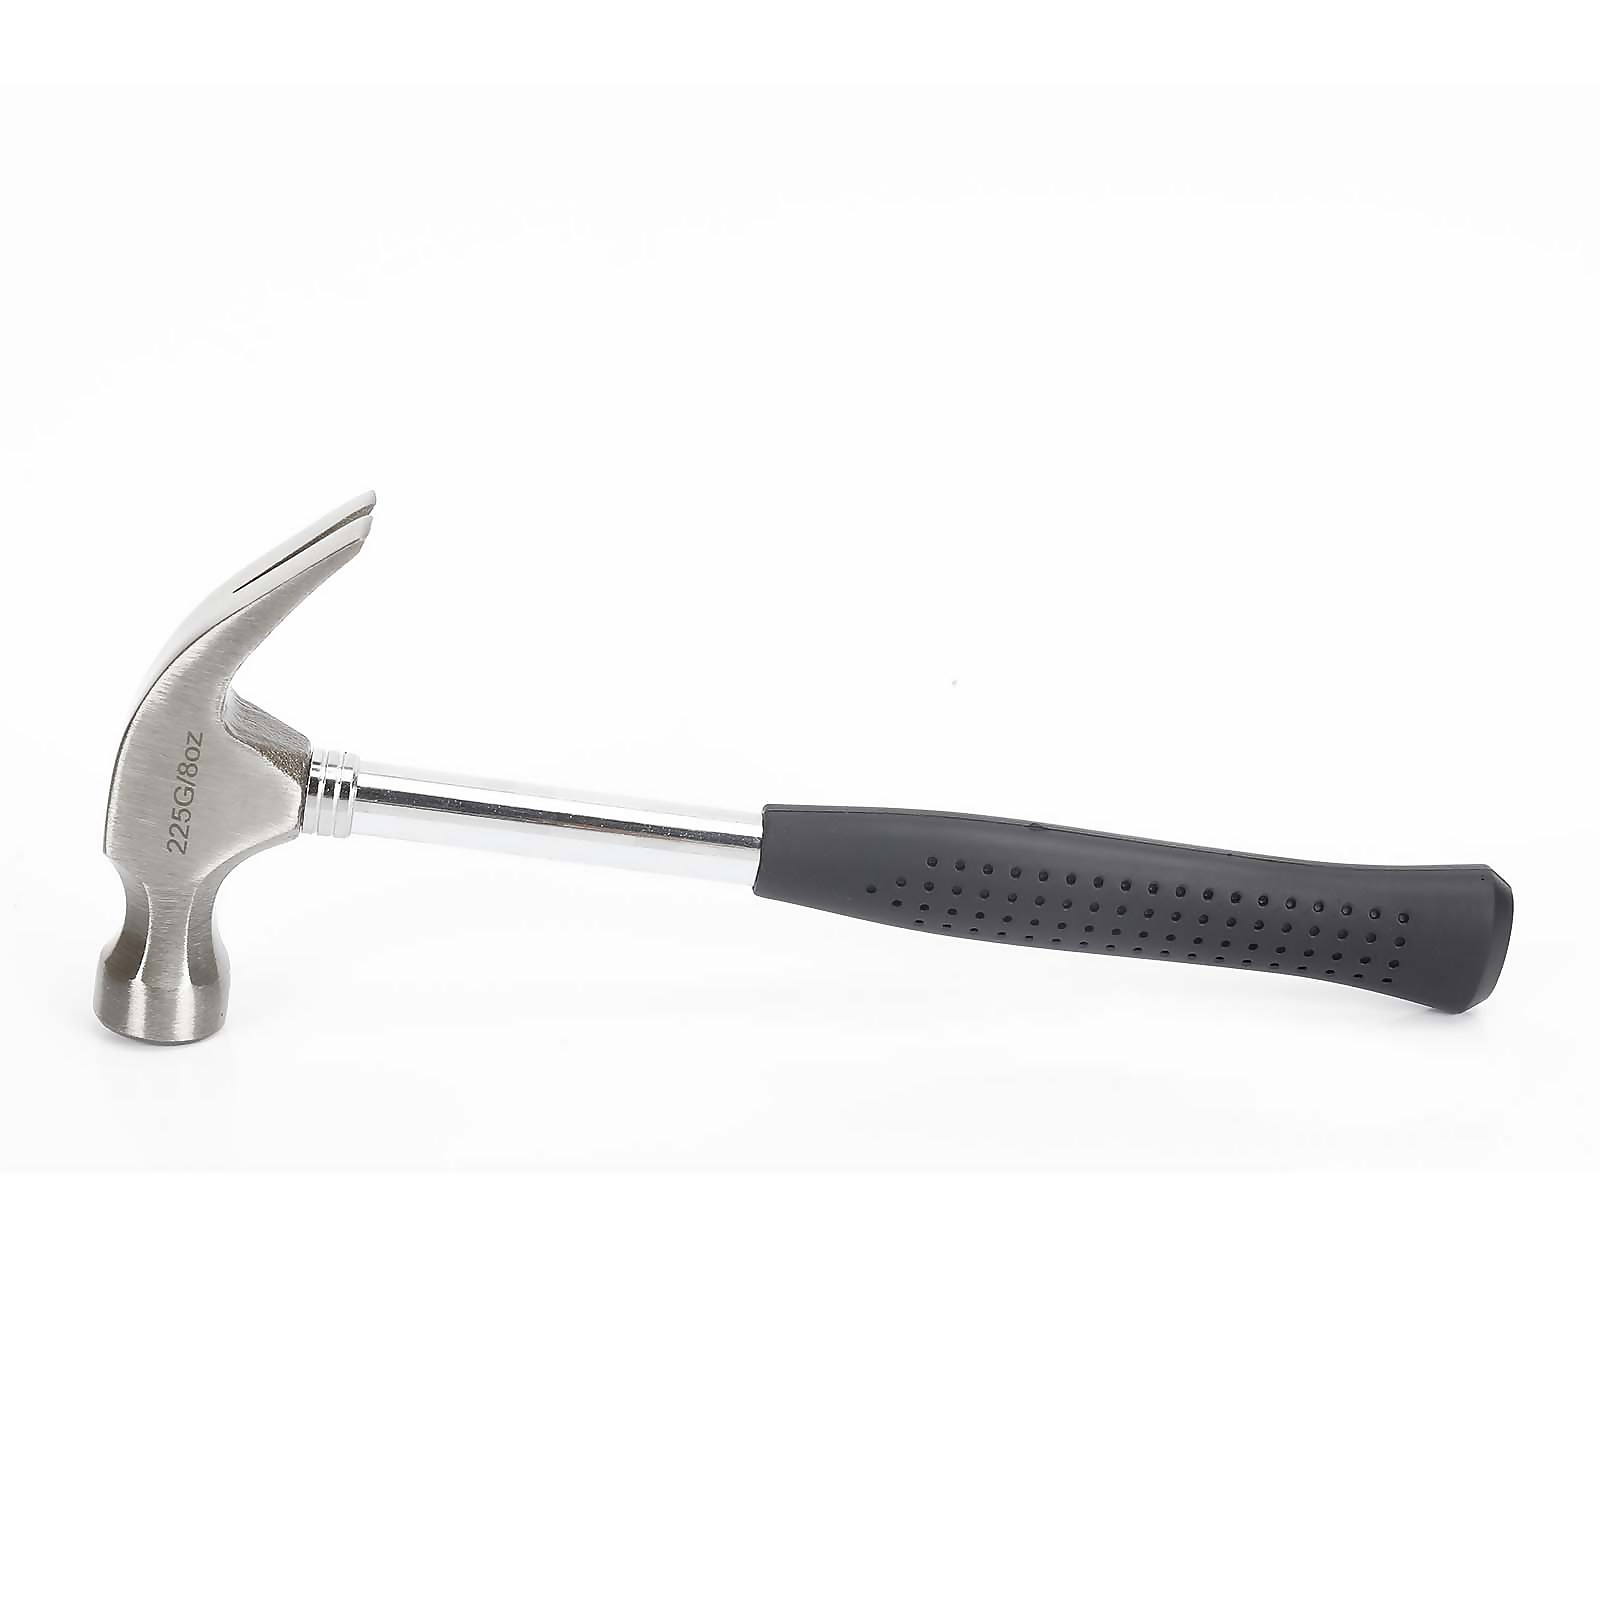 Photo of Sovereign 8oz Claw Hammer